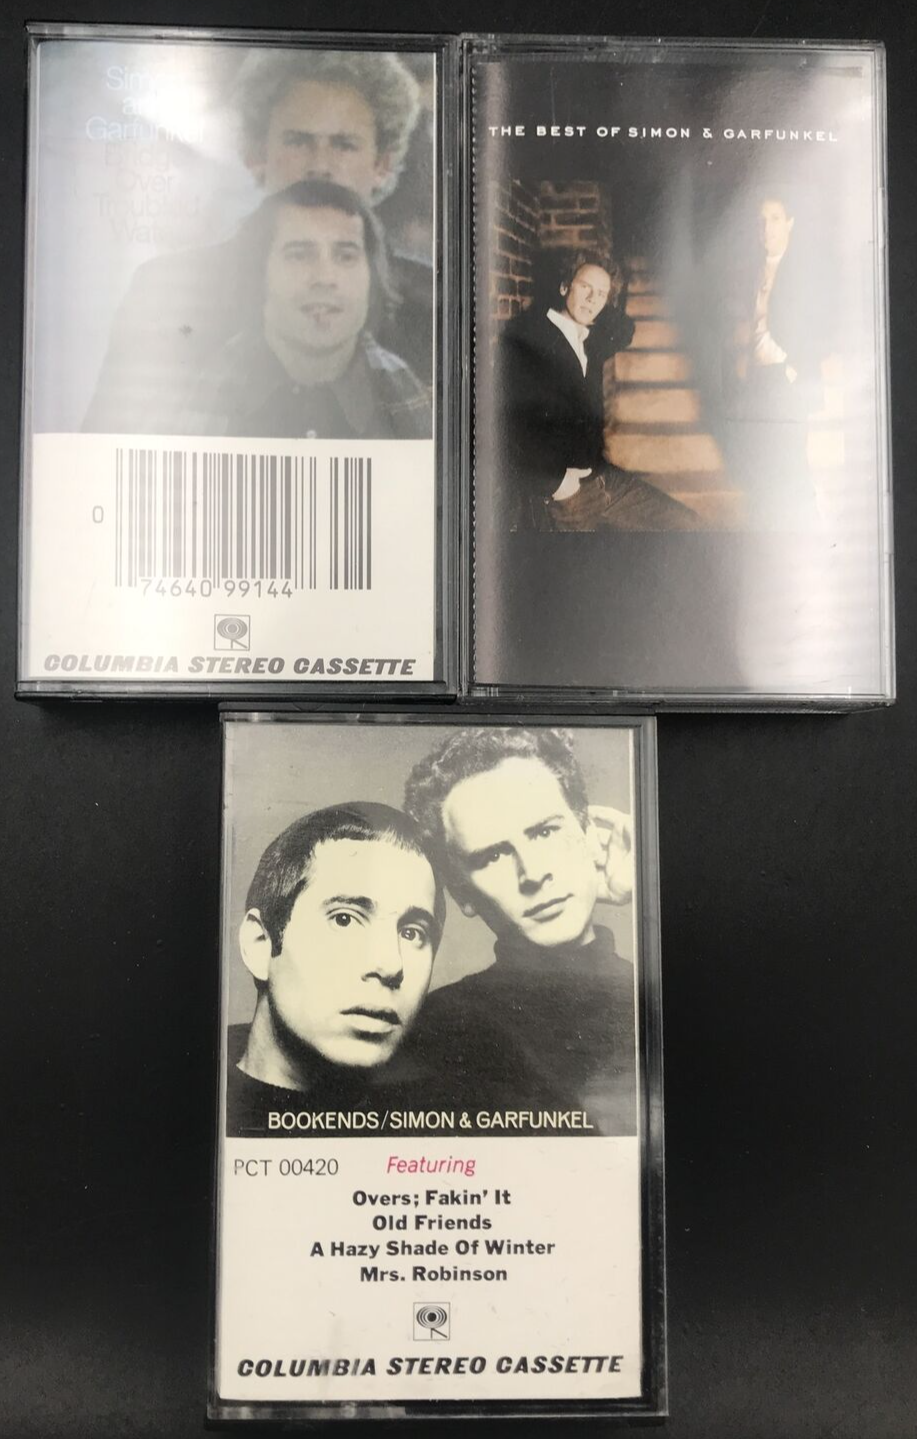 Primary image for 3-Simon & Garfunkel Cassette Tapes - Best Of, Bridge Over Troubled Waters & Boo